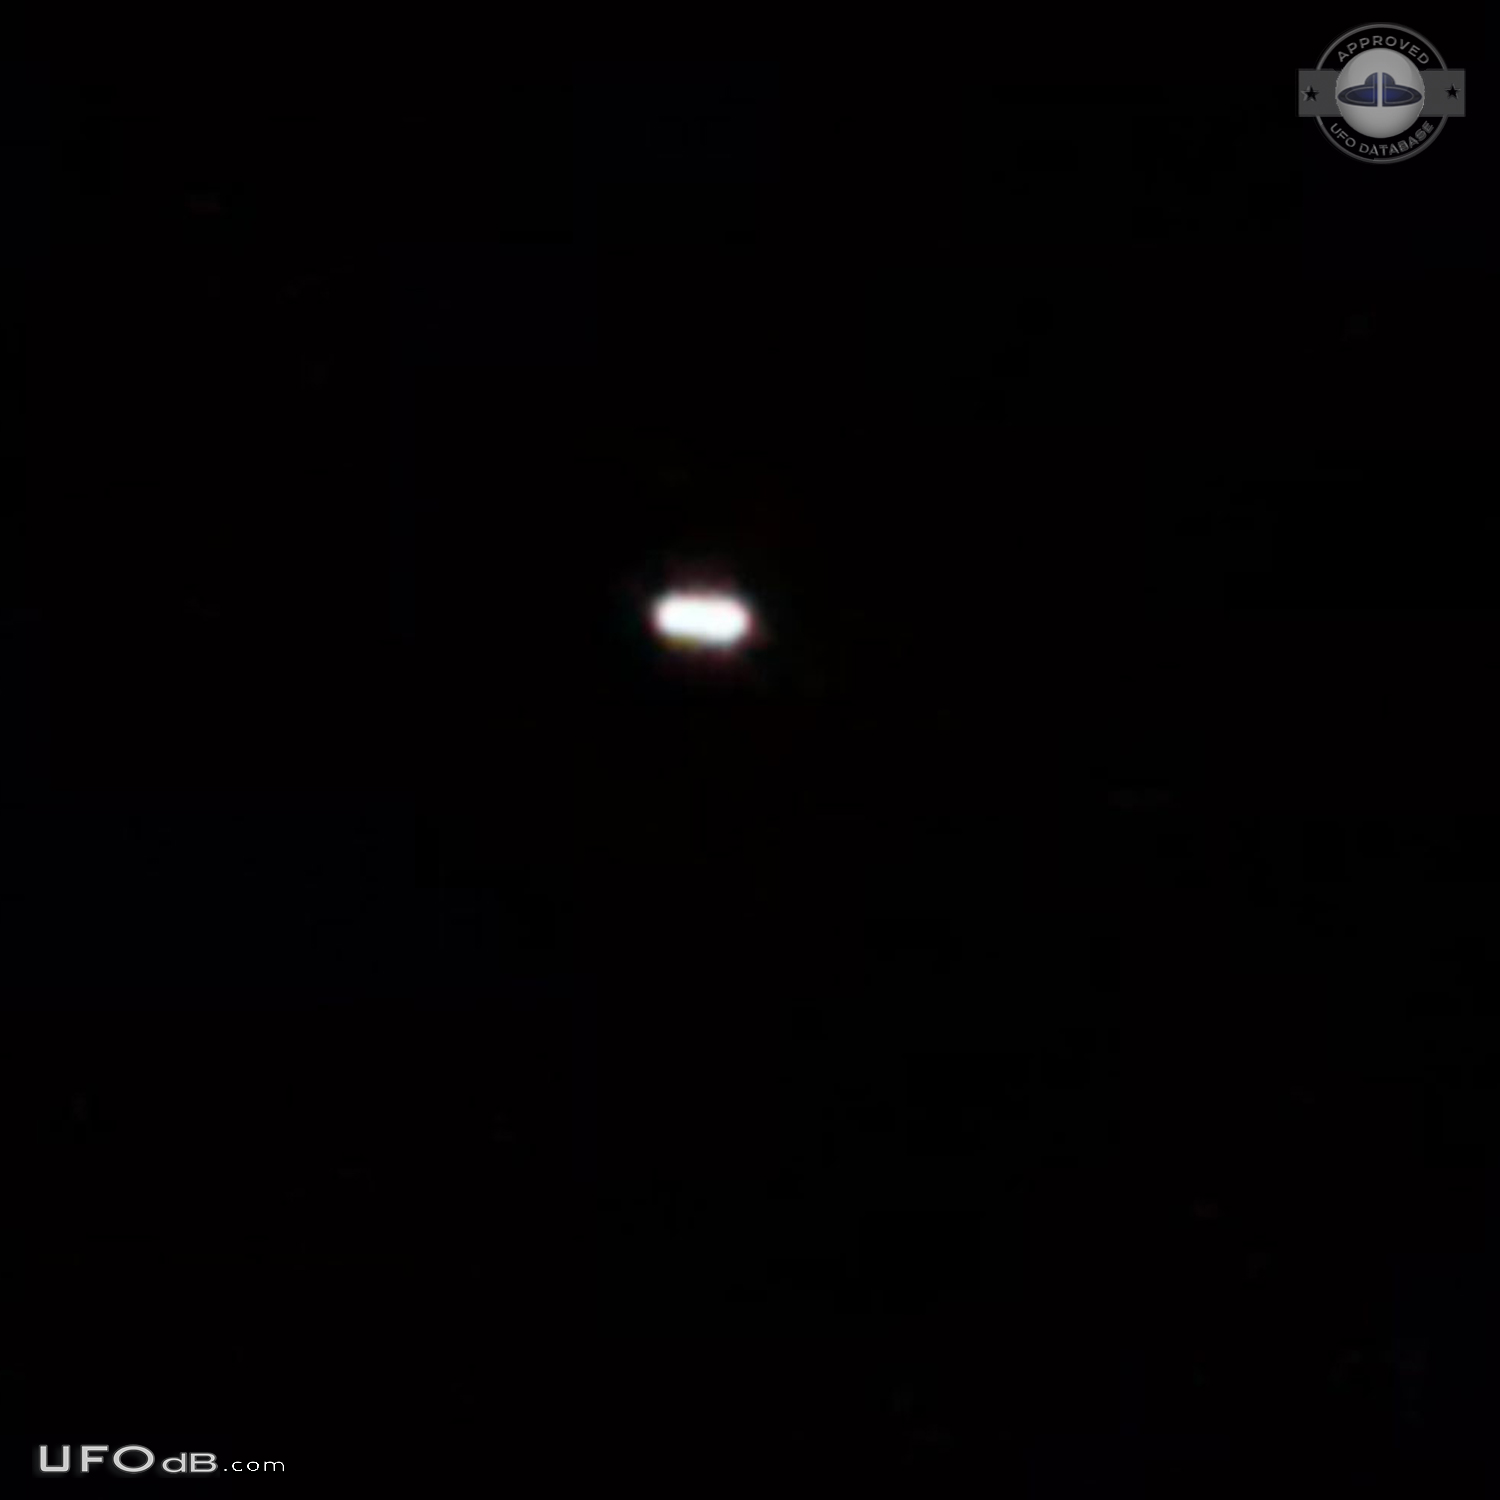 Oval UFO like a star but it disappeared - Bergen New York USA 2015 UFO Picture #731-2